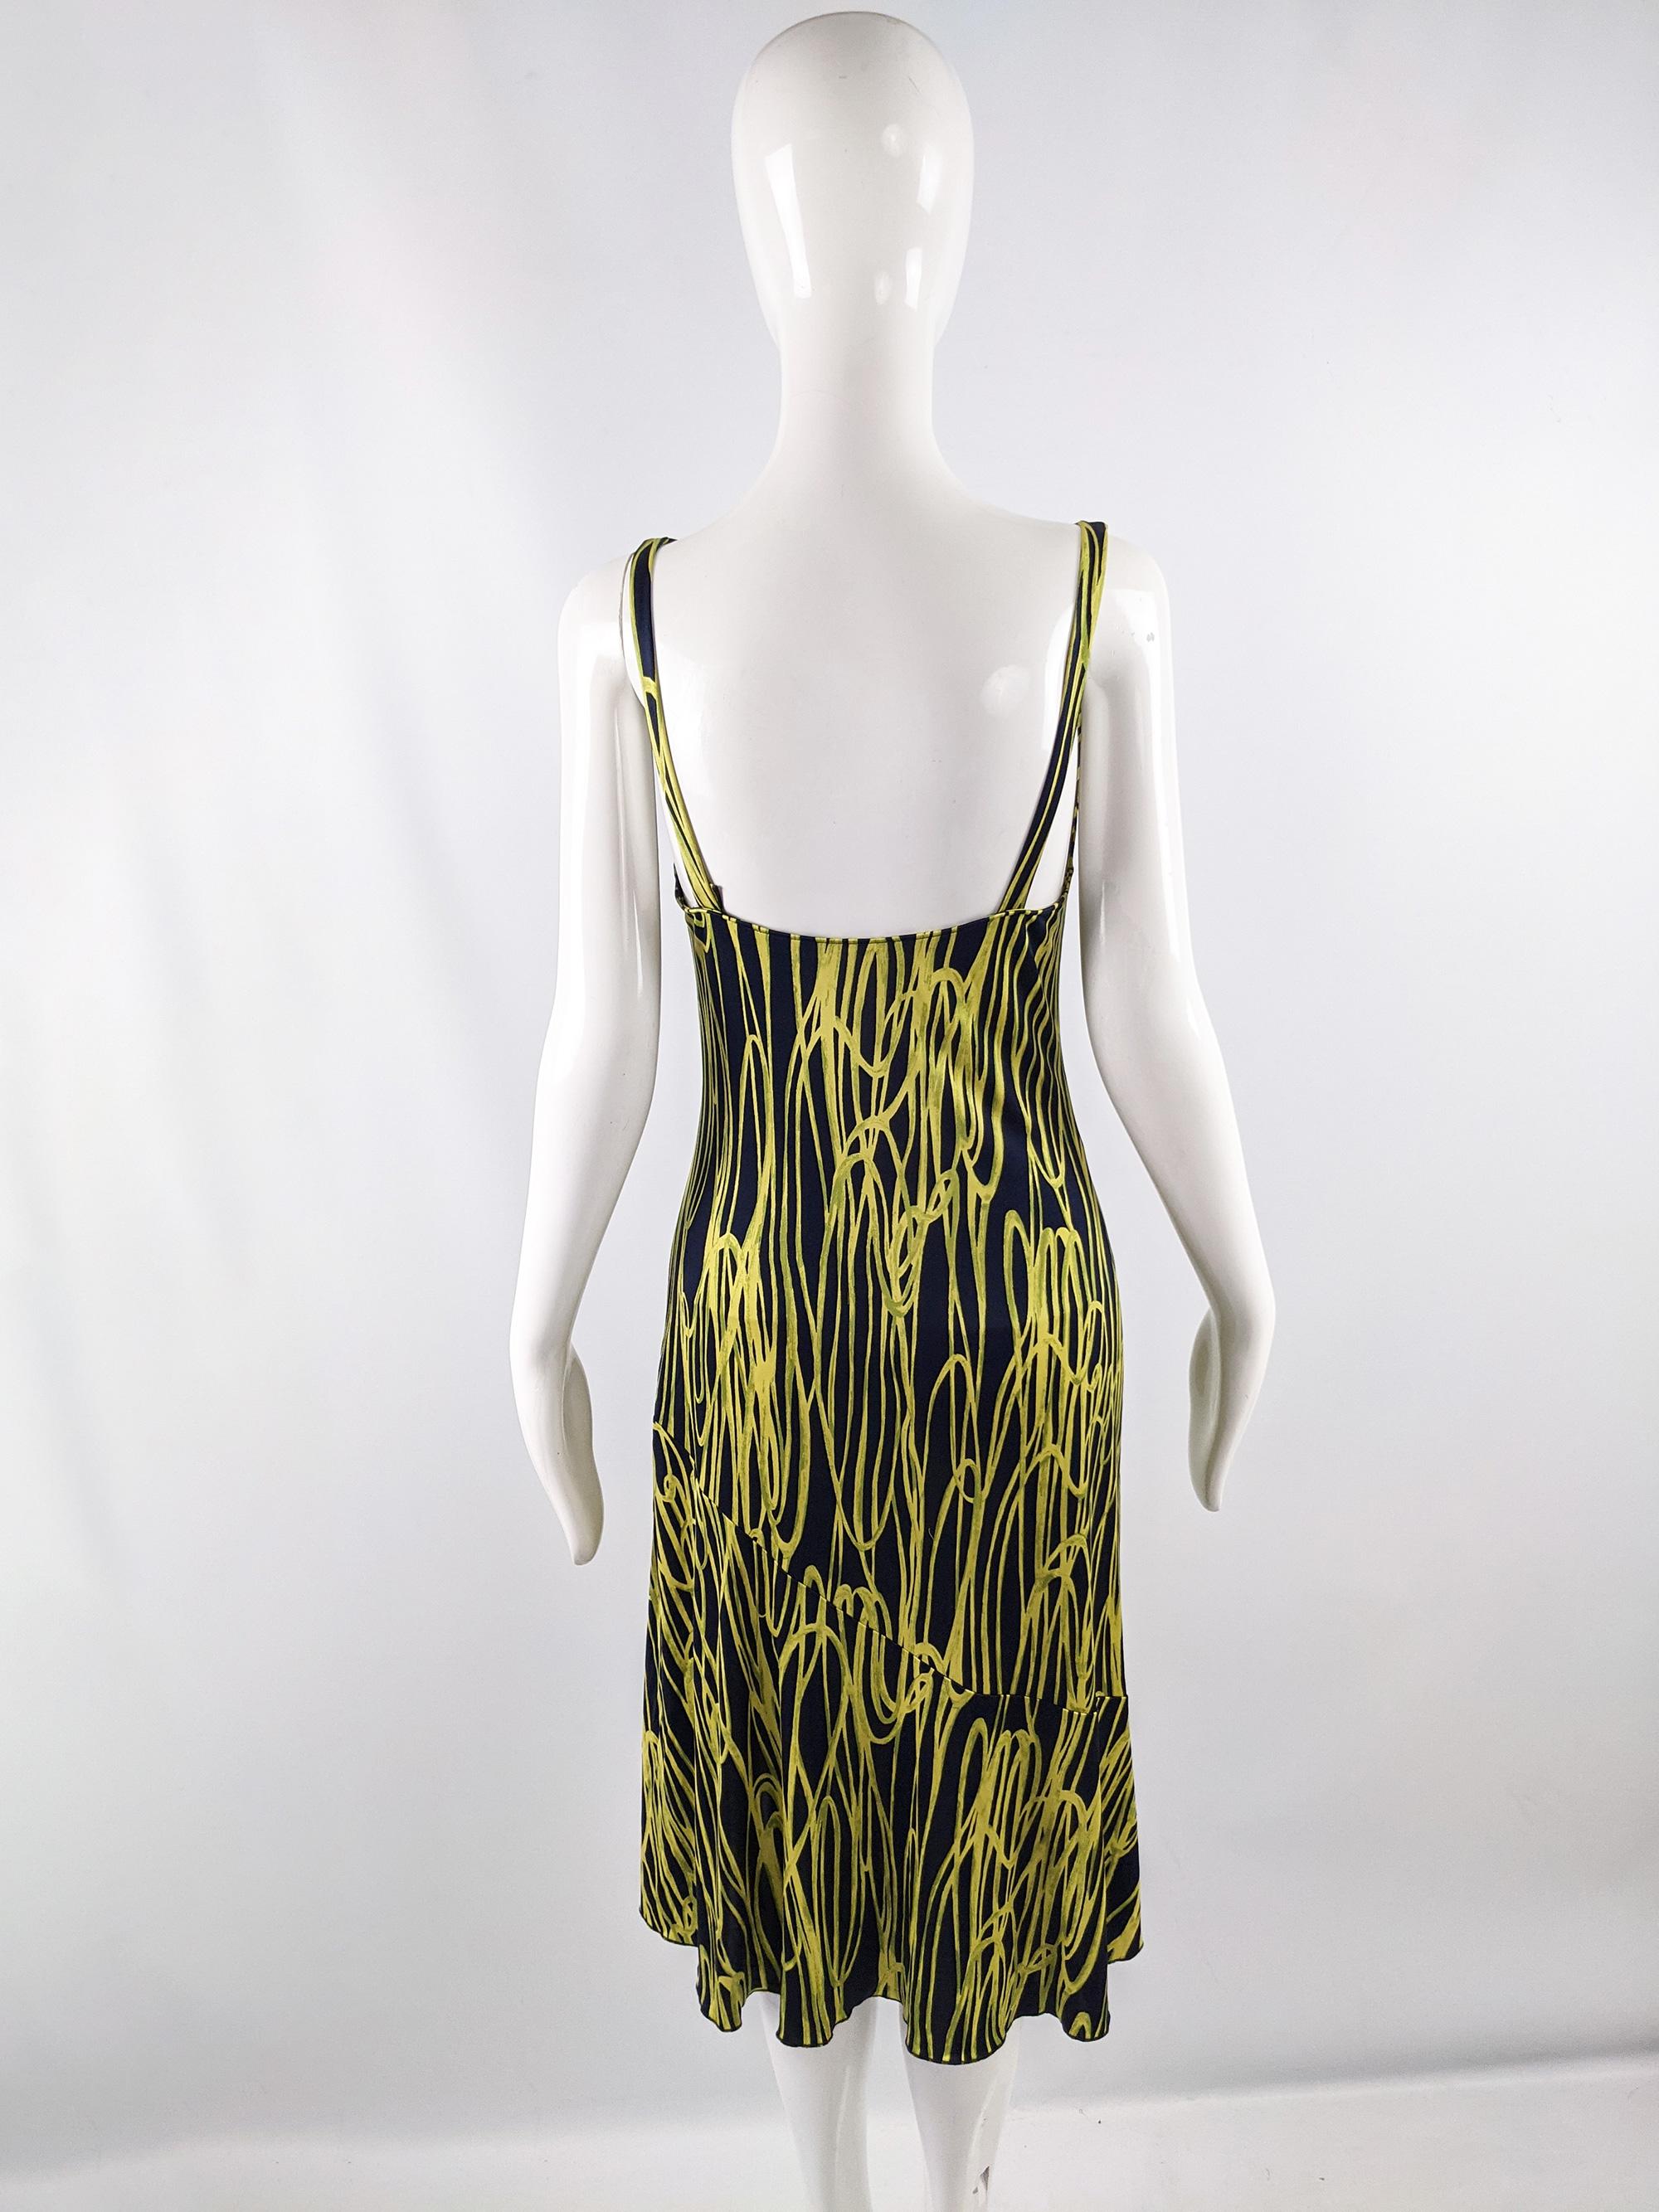 Women's Moschino Vintage Silk Jersey Blue & Yellow Squiggle Print Cowl Neck Dress, 2000s For Sale